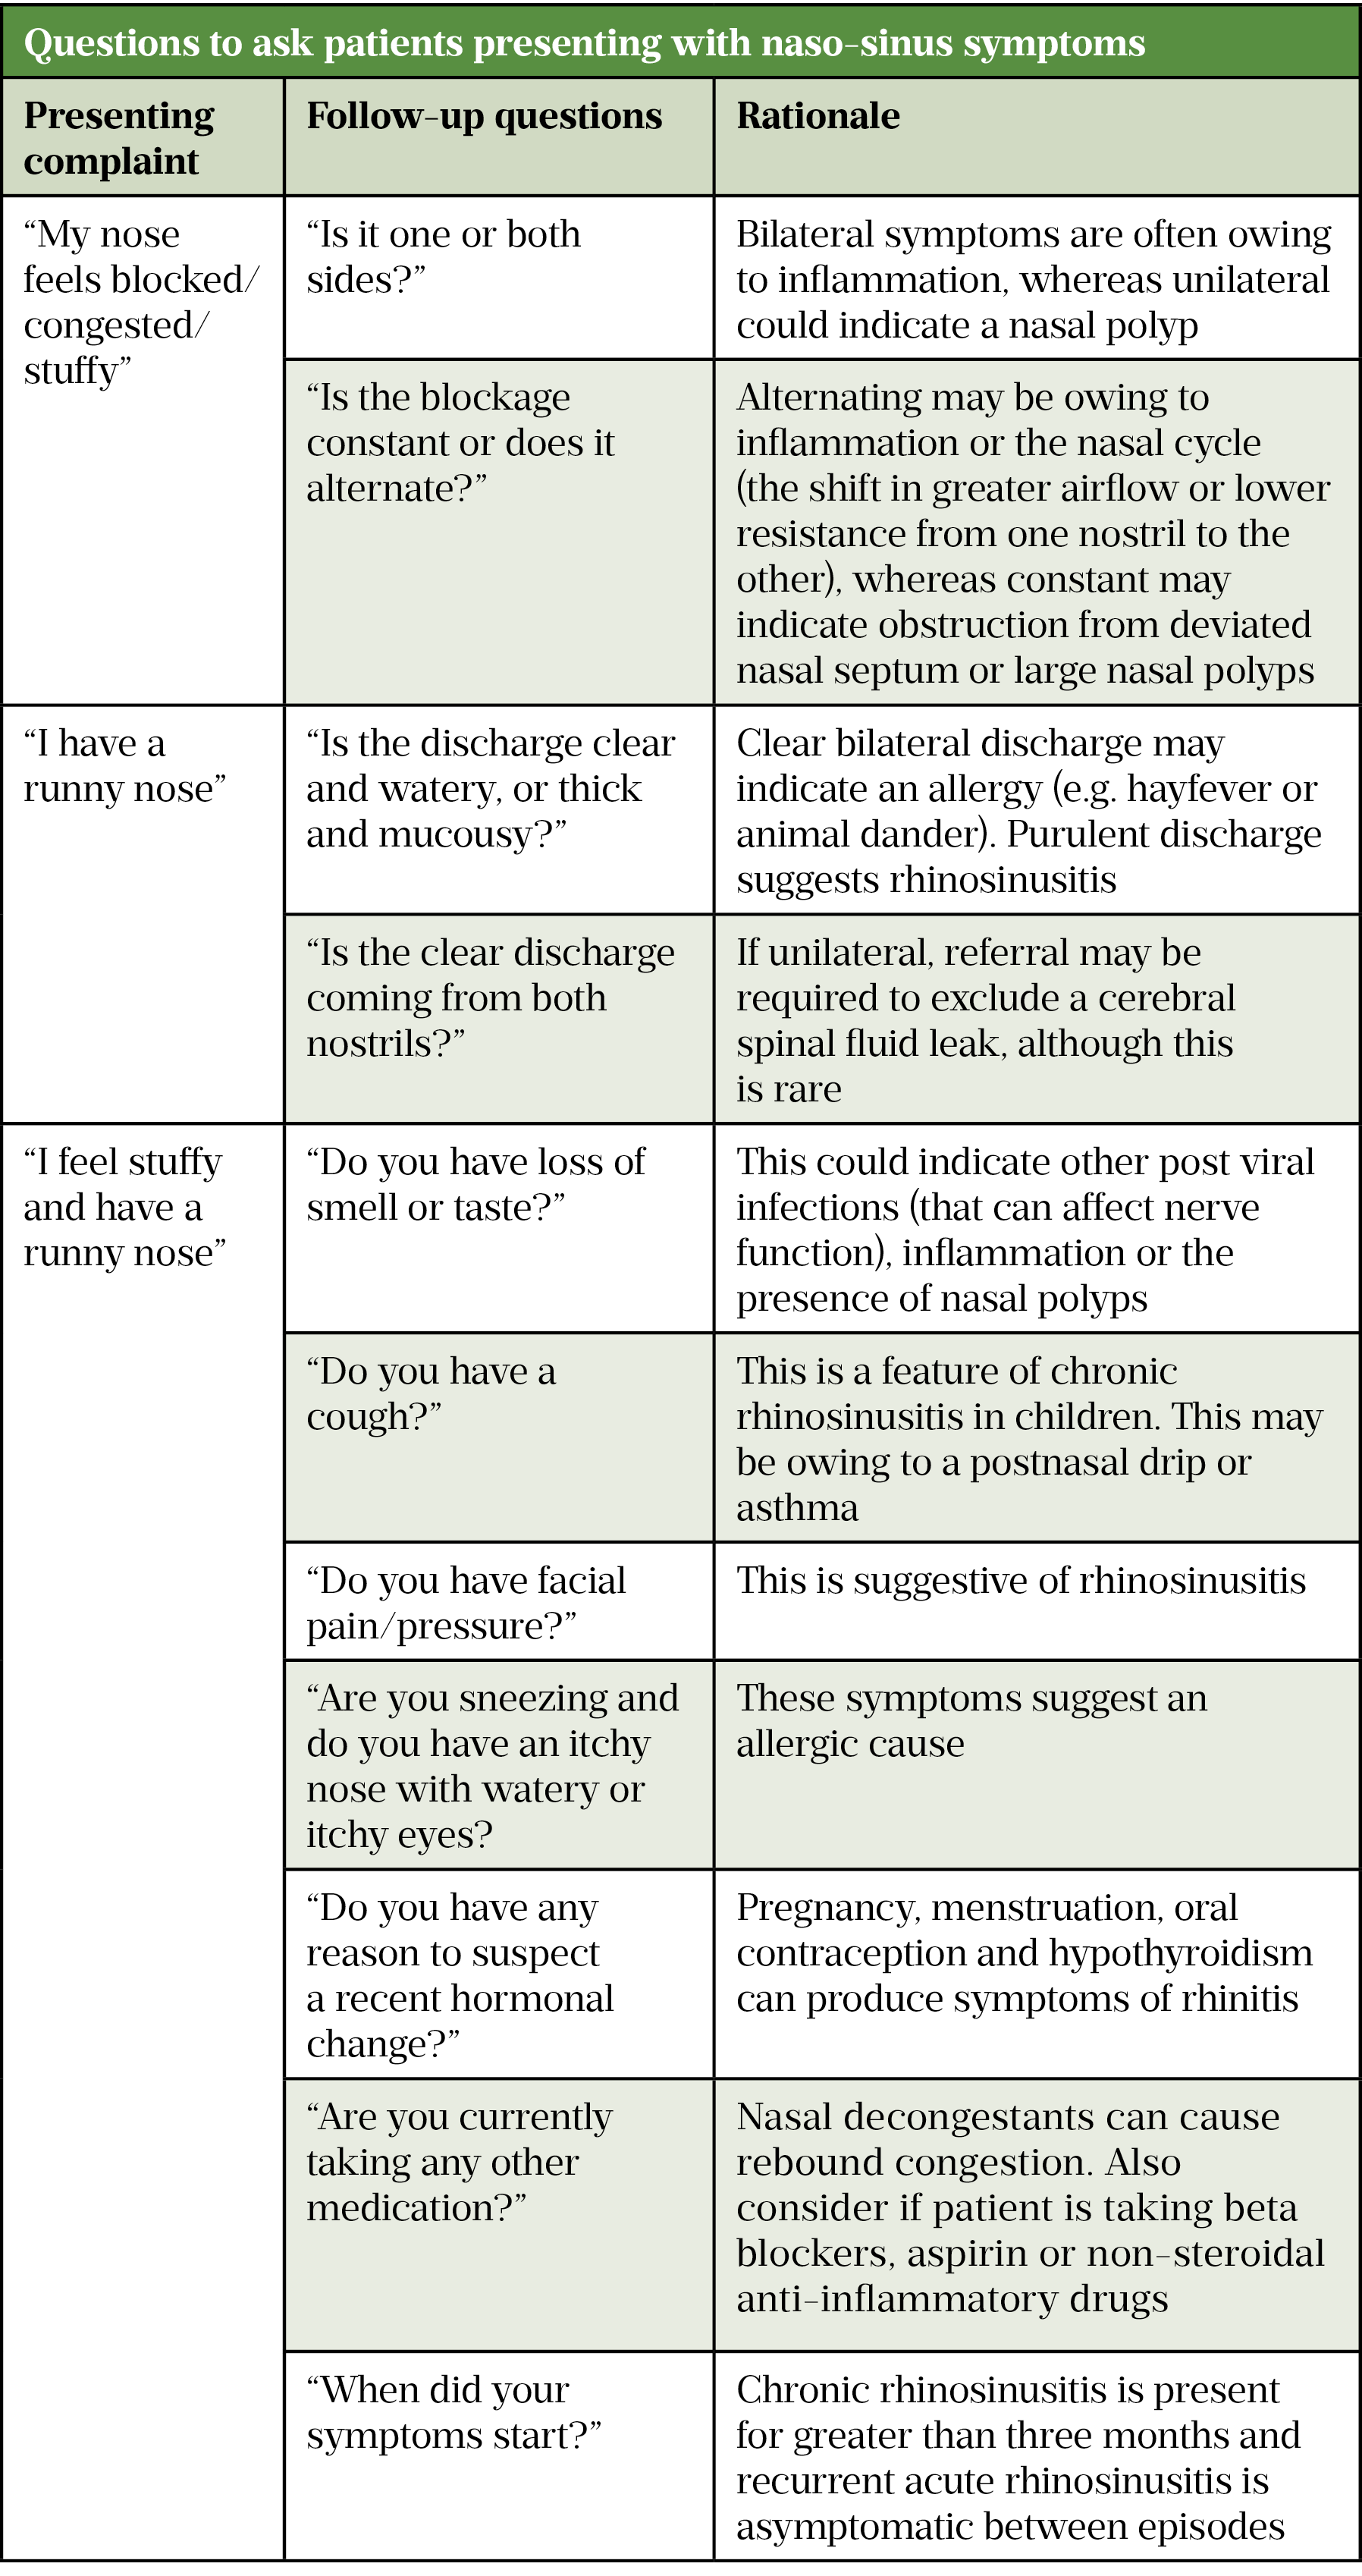 Table: Questions to ask patients with naso-sinus symptoms